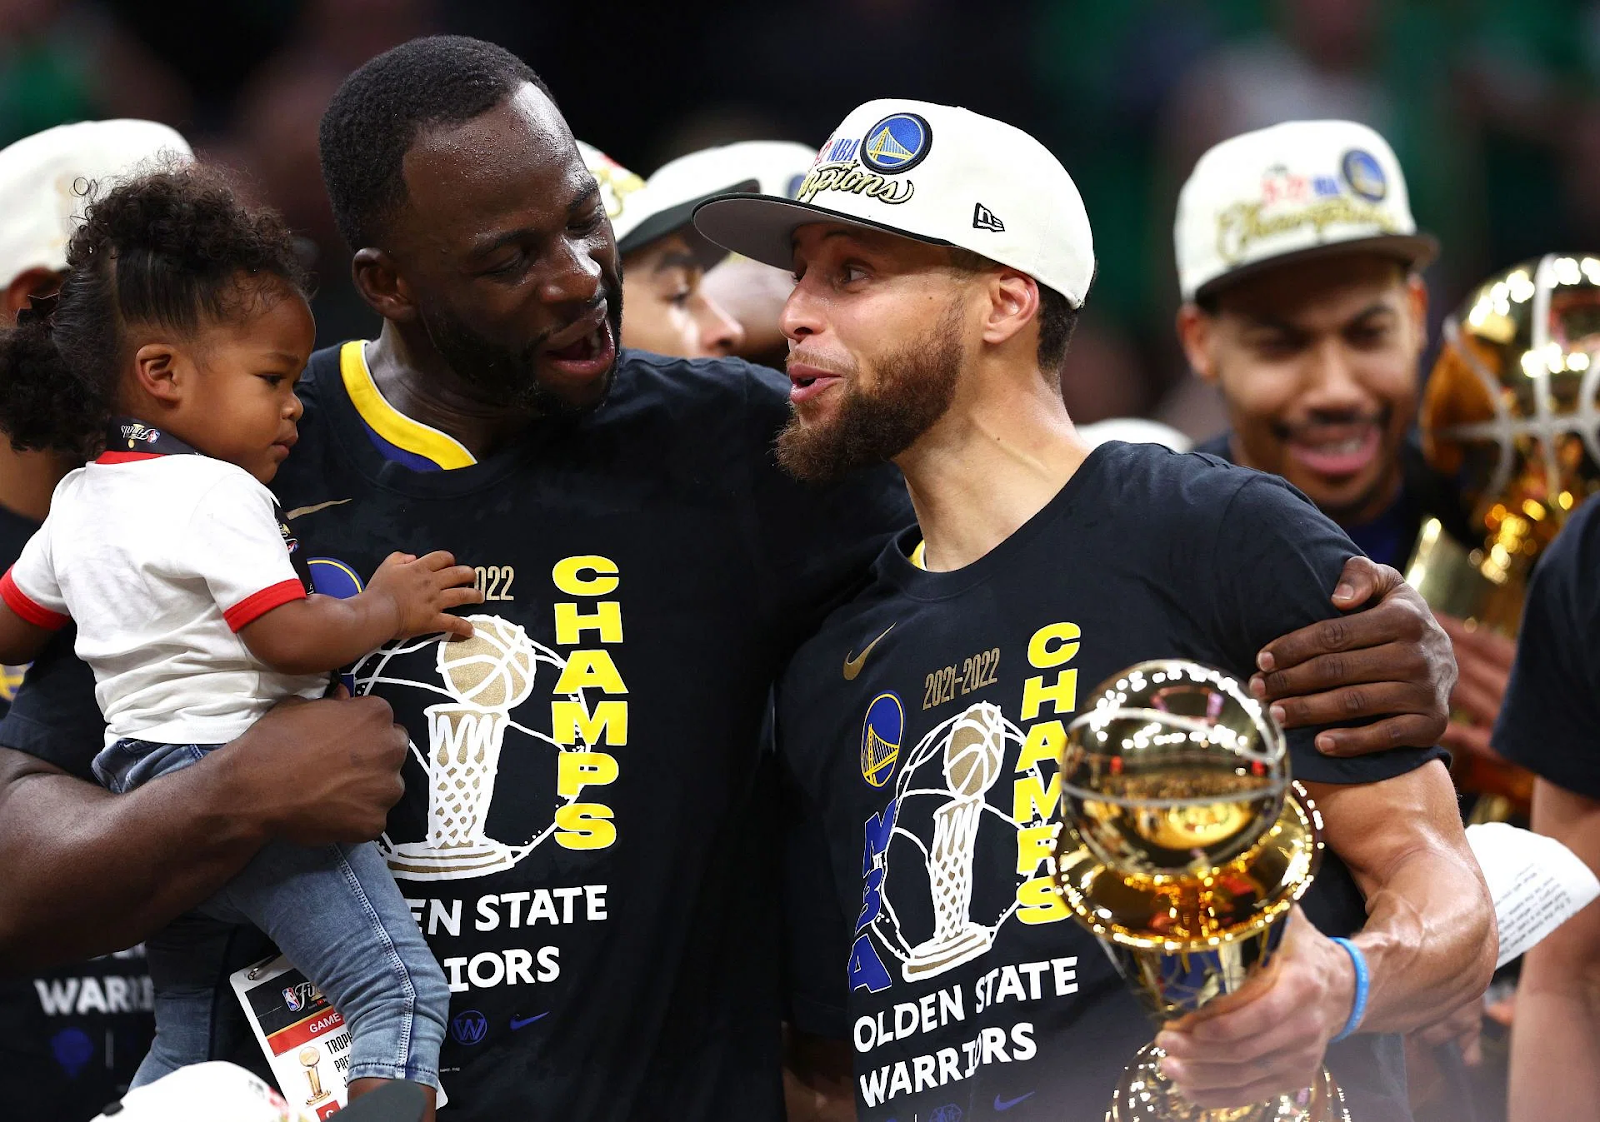 NBA Rumors: Steph Curry is expected to be an unhappy man : It's no surprise that Steph Curry would be livid if the Golden State Warriors